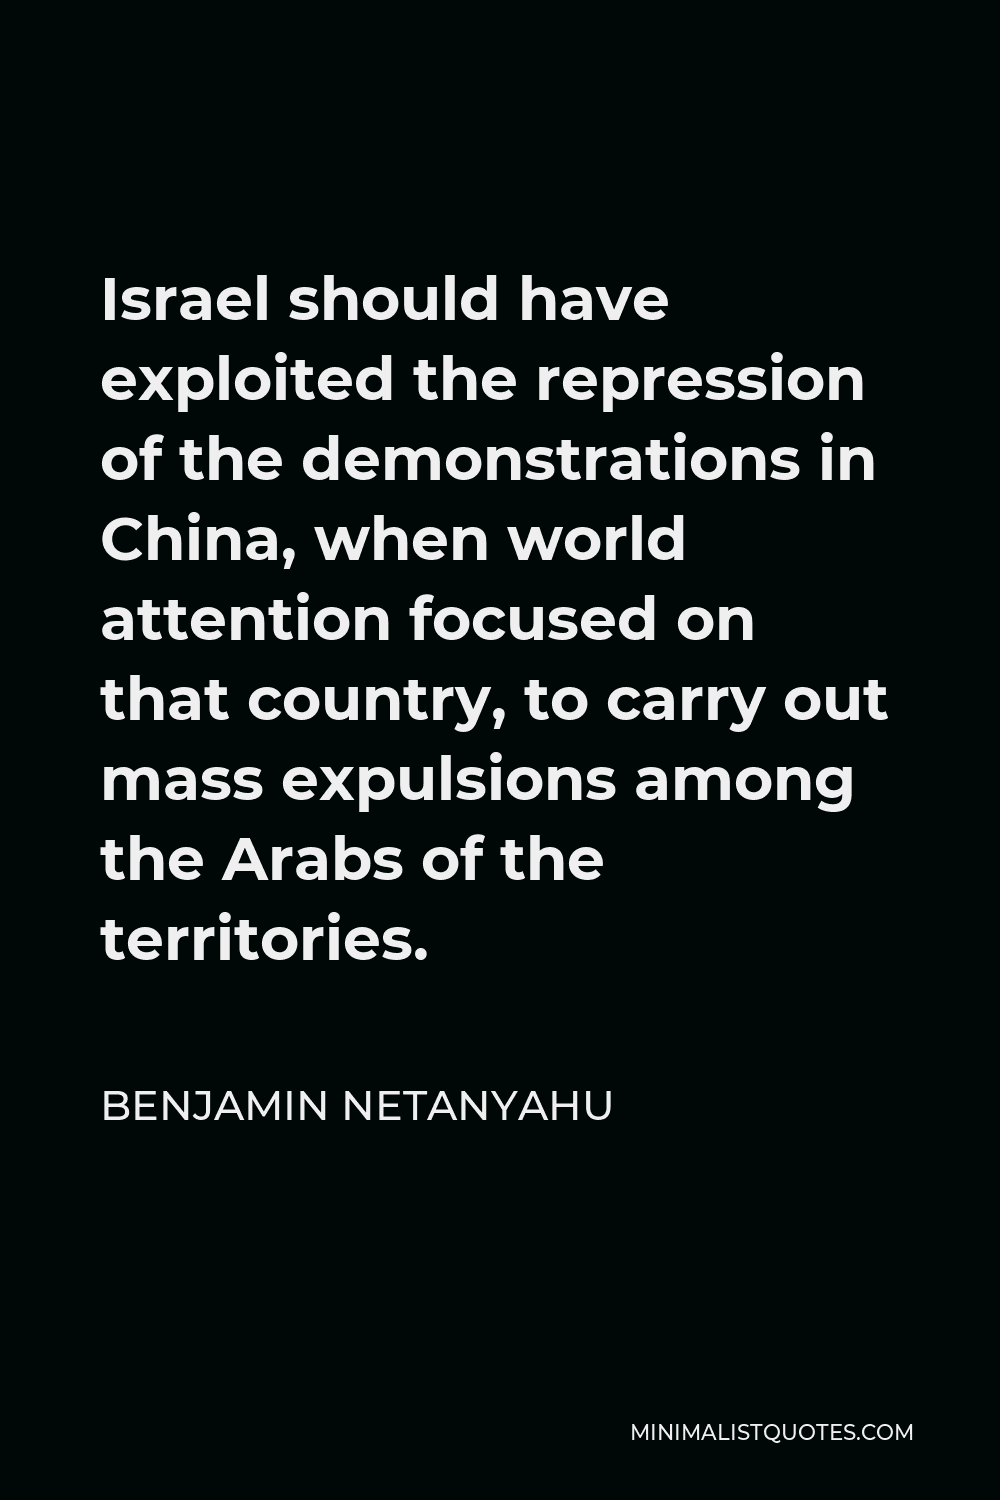 Benjamin Netanyahu Quote - Israel should have exploited the repression of the demonstrations in China, when world attention focused on that country, to carry out mass expulsions among the Arabs of the territories.